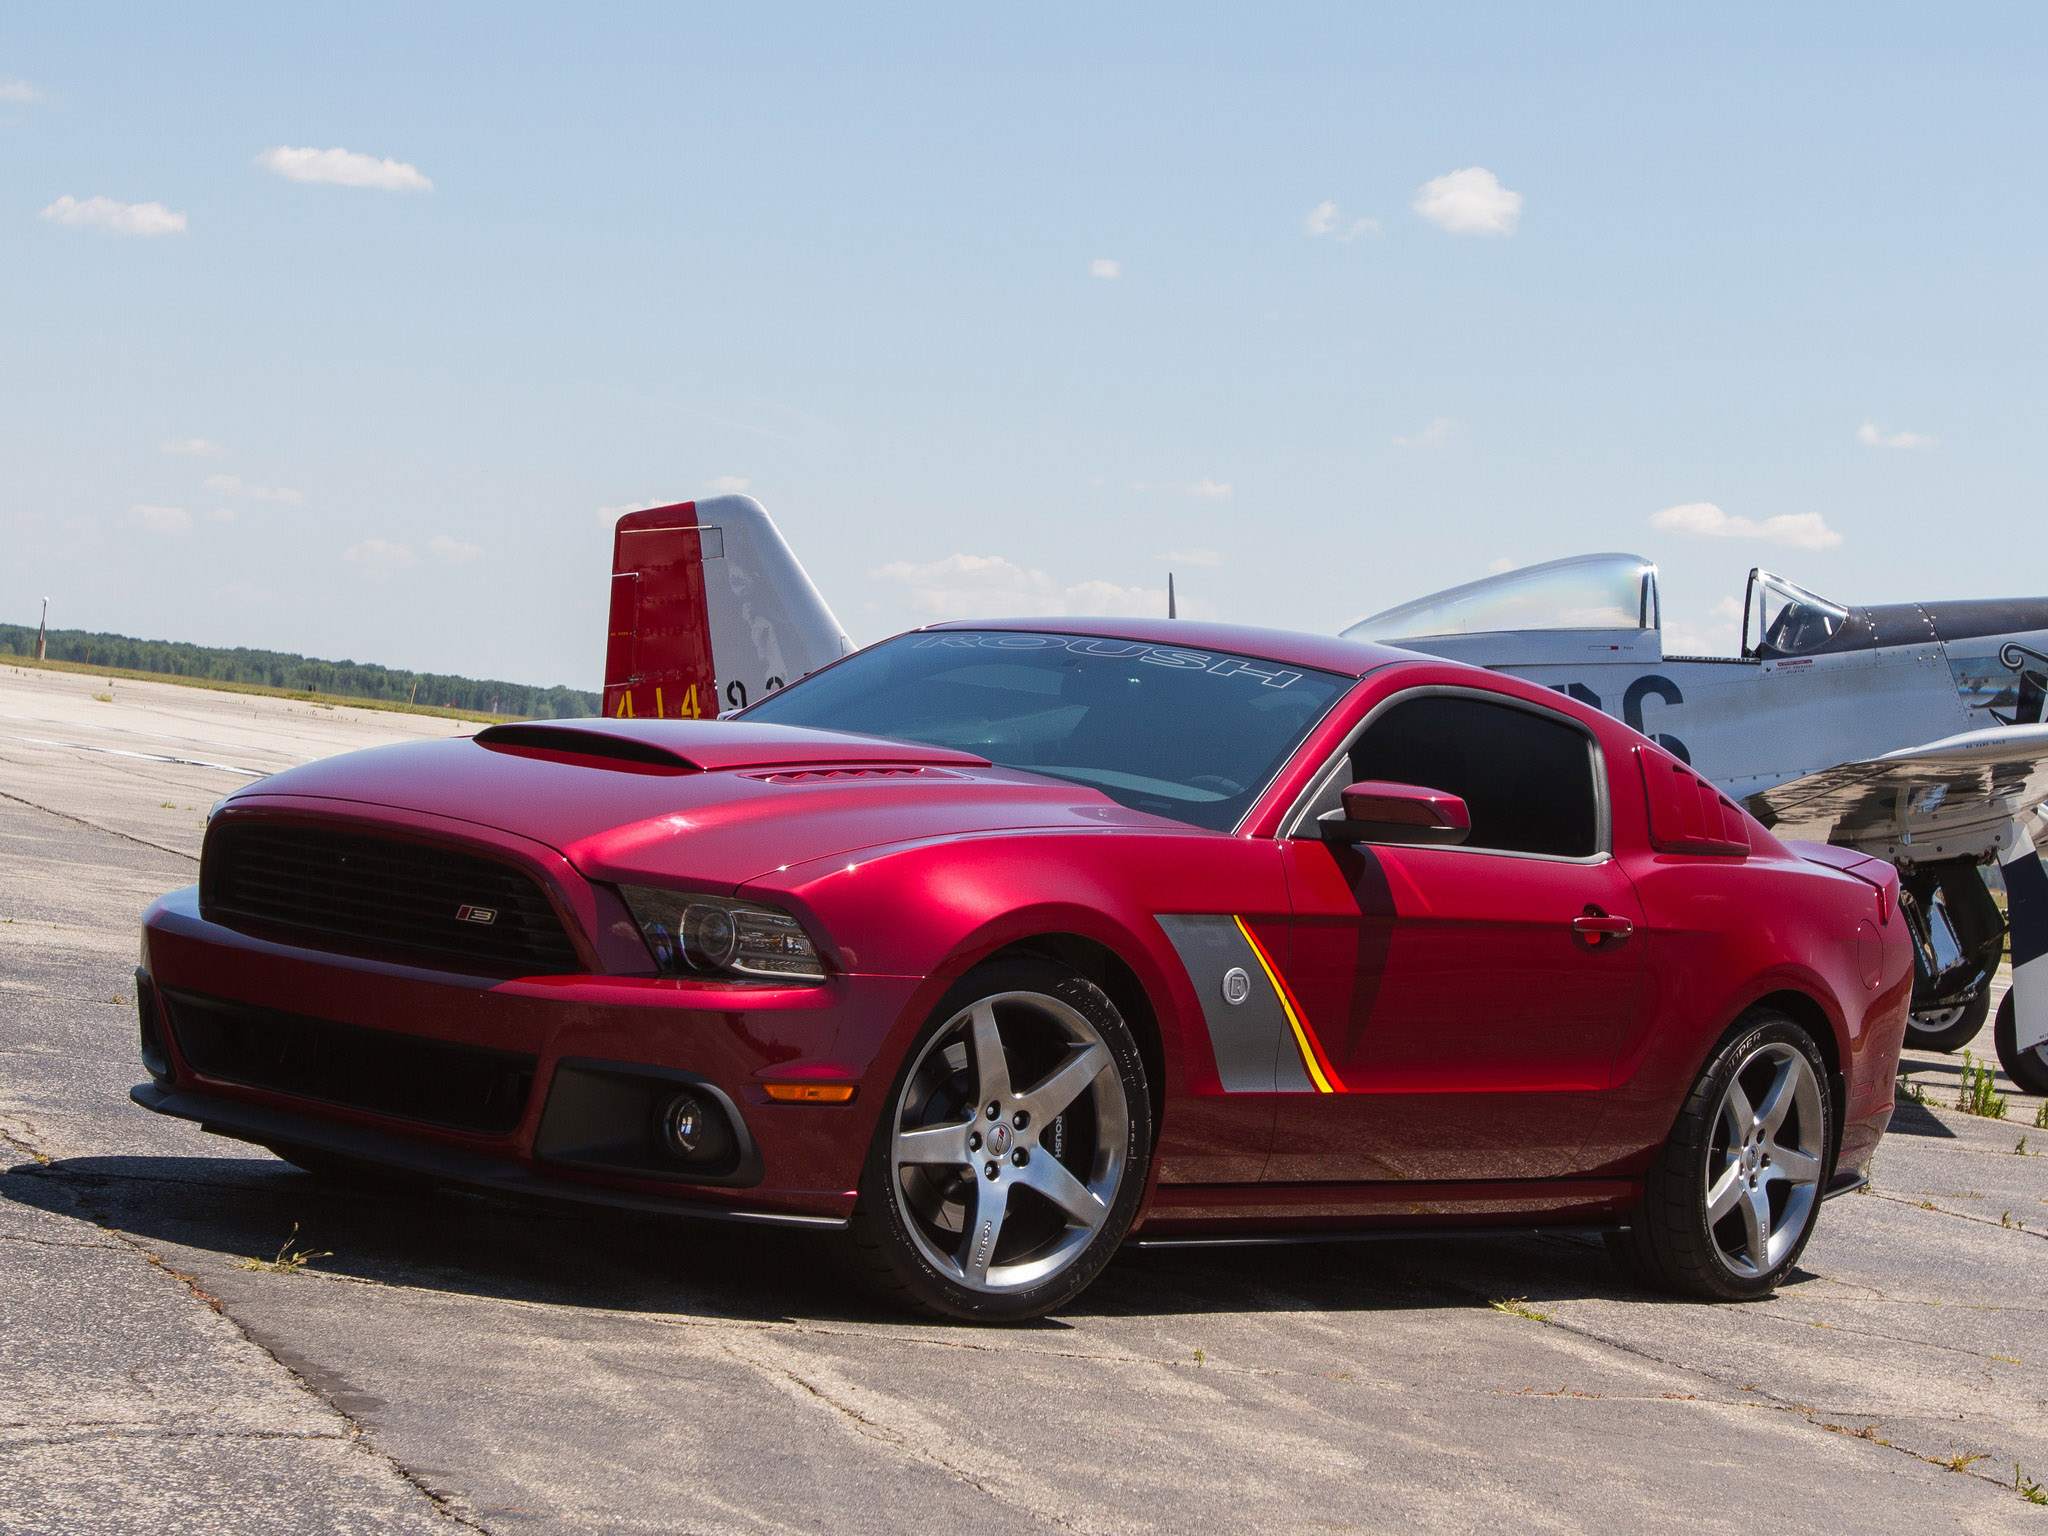 2013, Roush, Ford, Mustang, Stage 3, Muscle, Supercar, Supercars, Airplane, Plane, Retro, Military Wallpaper